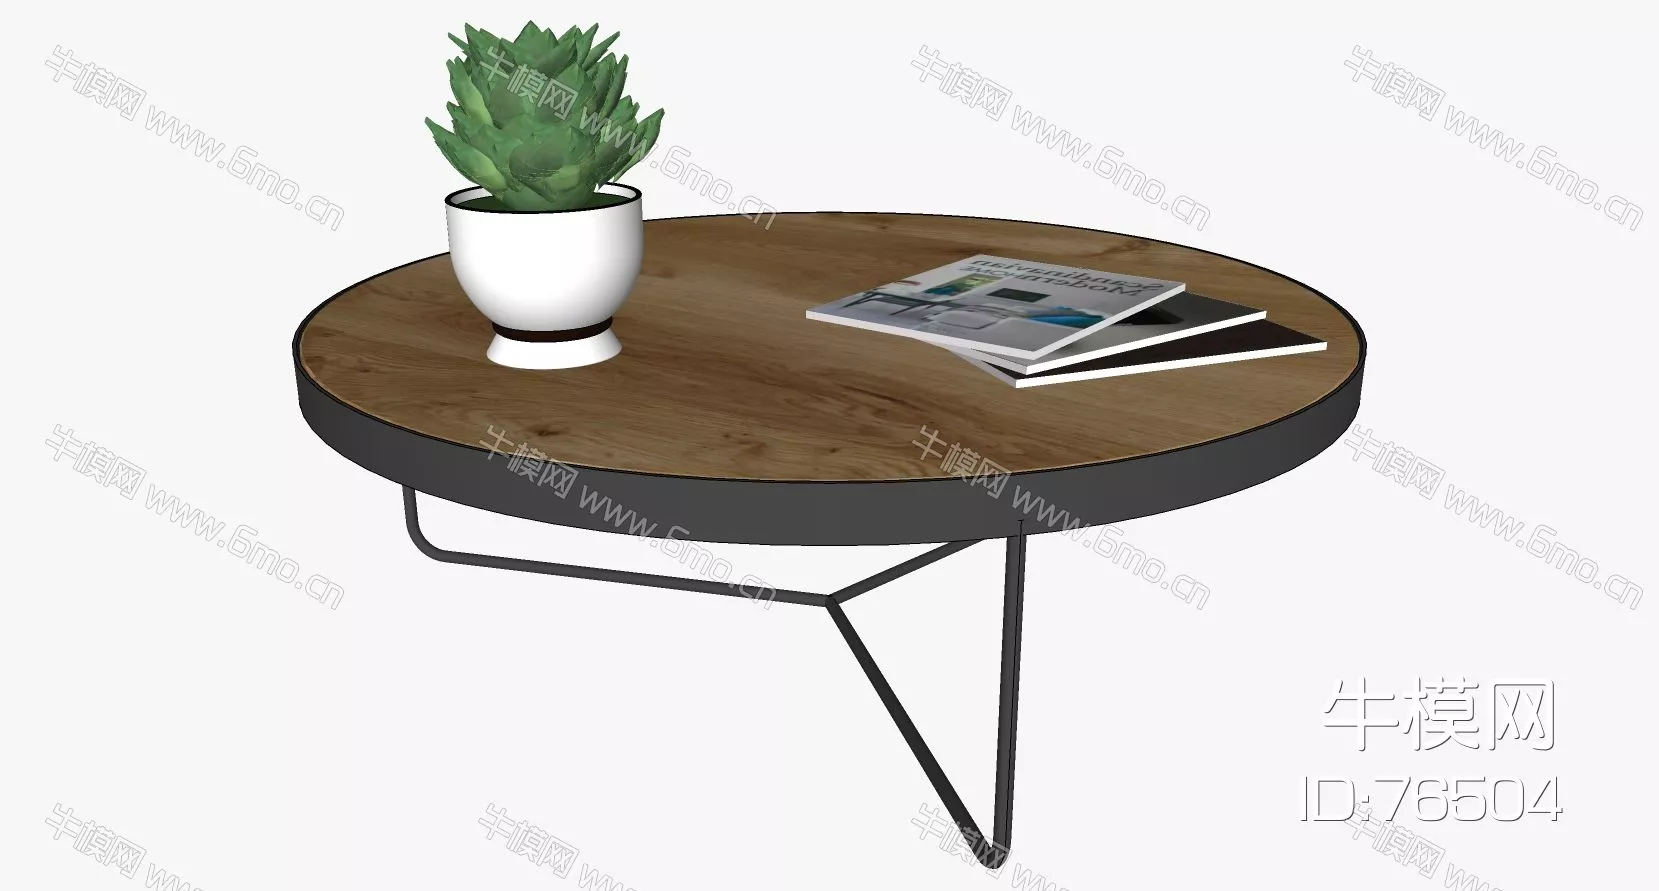 NORDIC COFFEE TABLE - SKETCHUP 3D MODEL - ENSCAPE - 76504